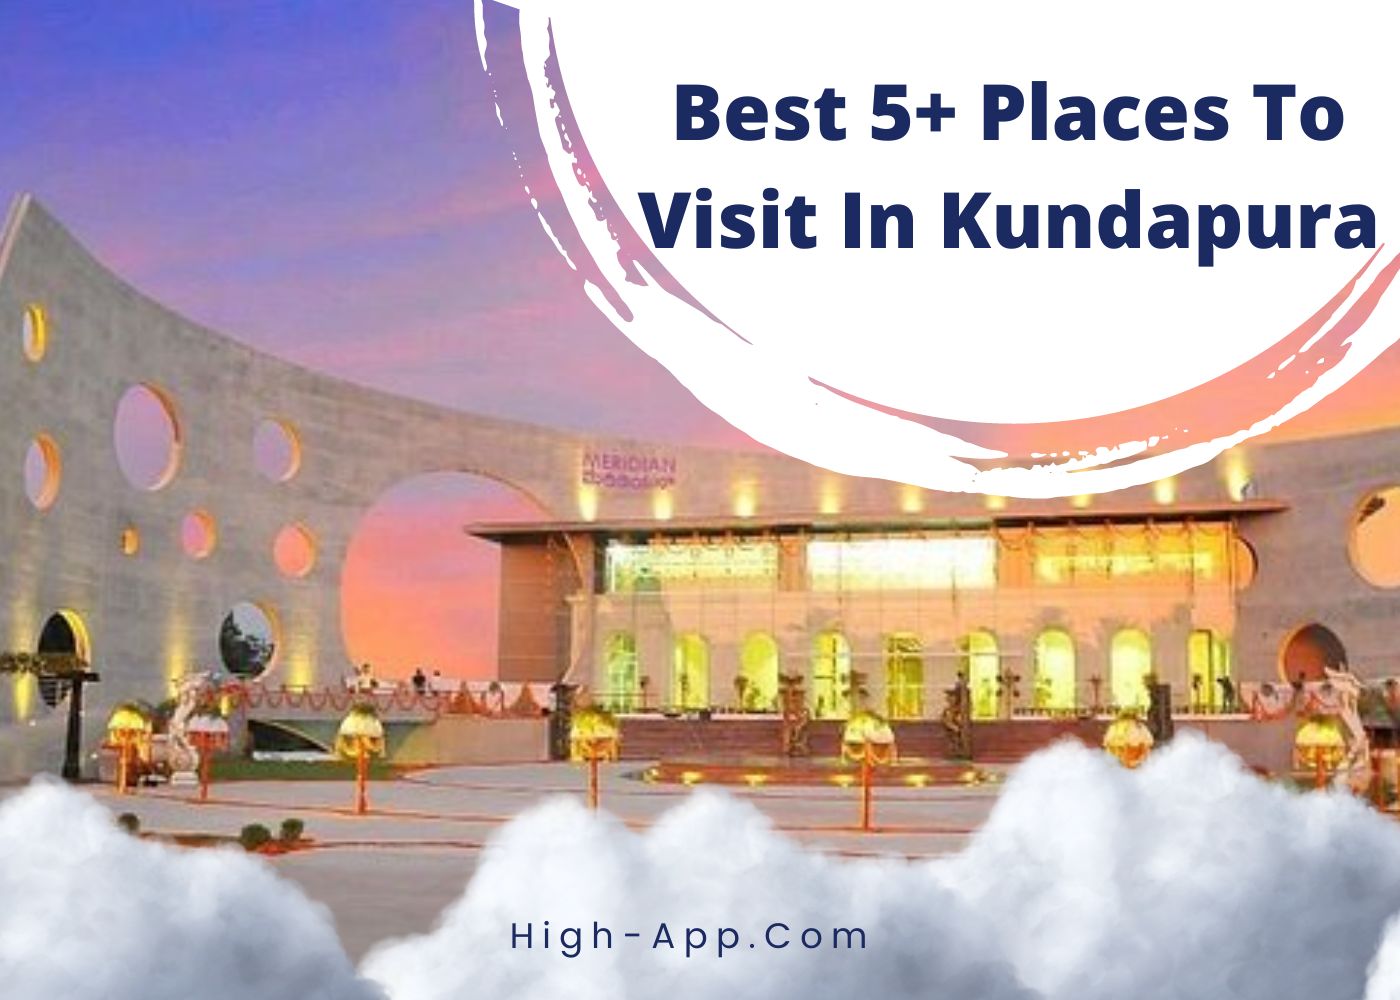 Best 5+ Places To Visit In Kundapura